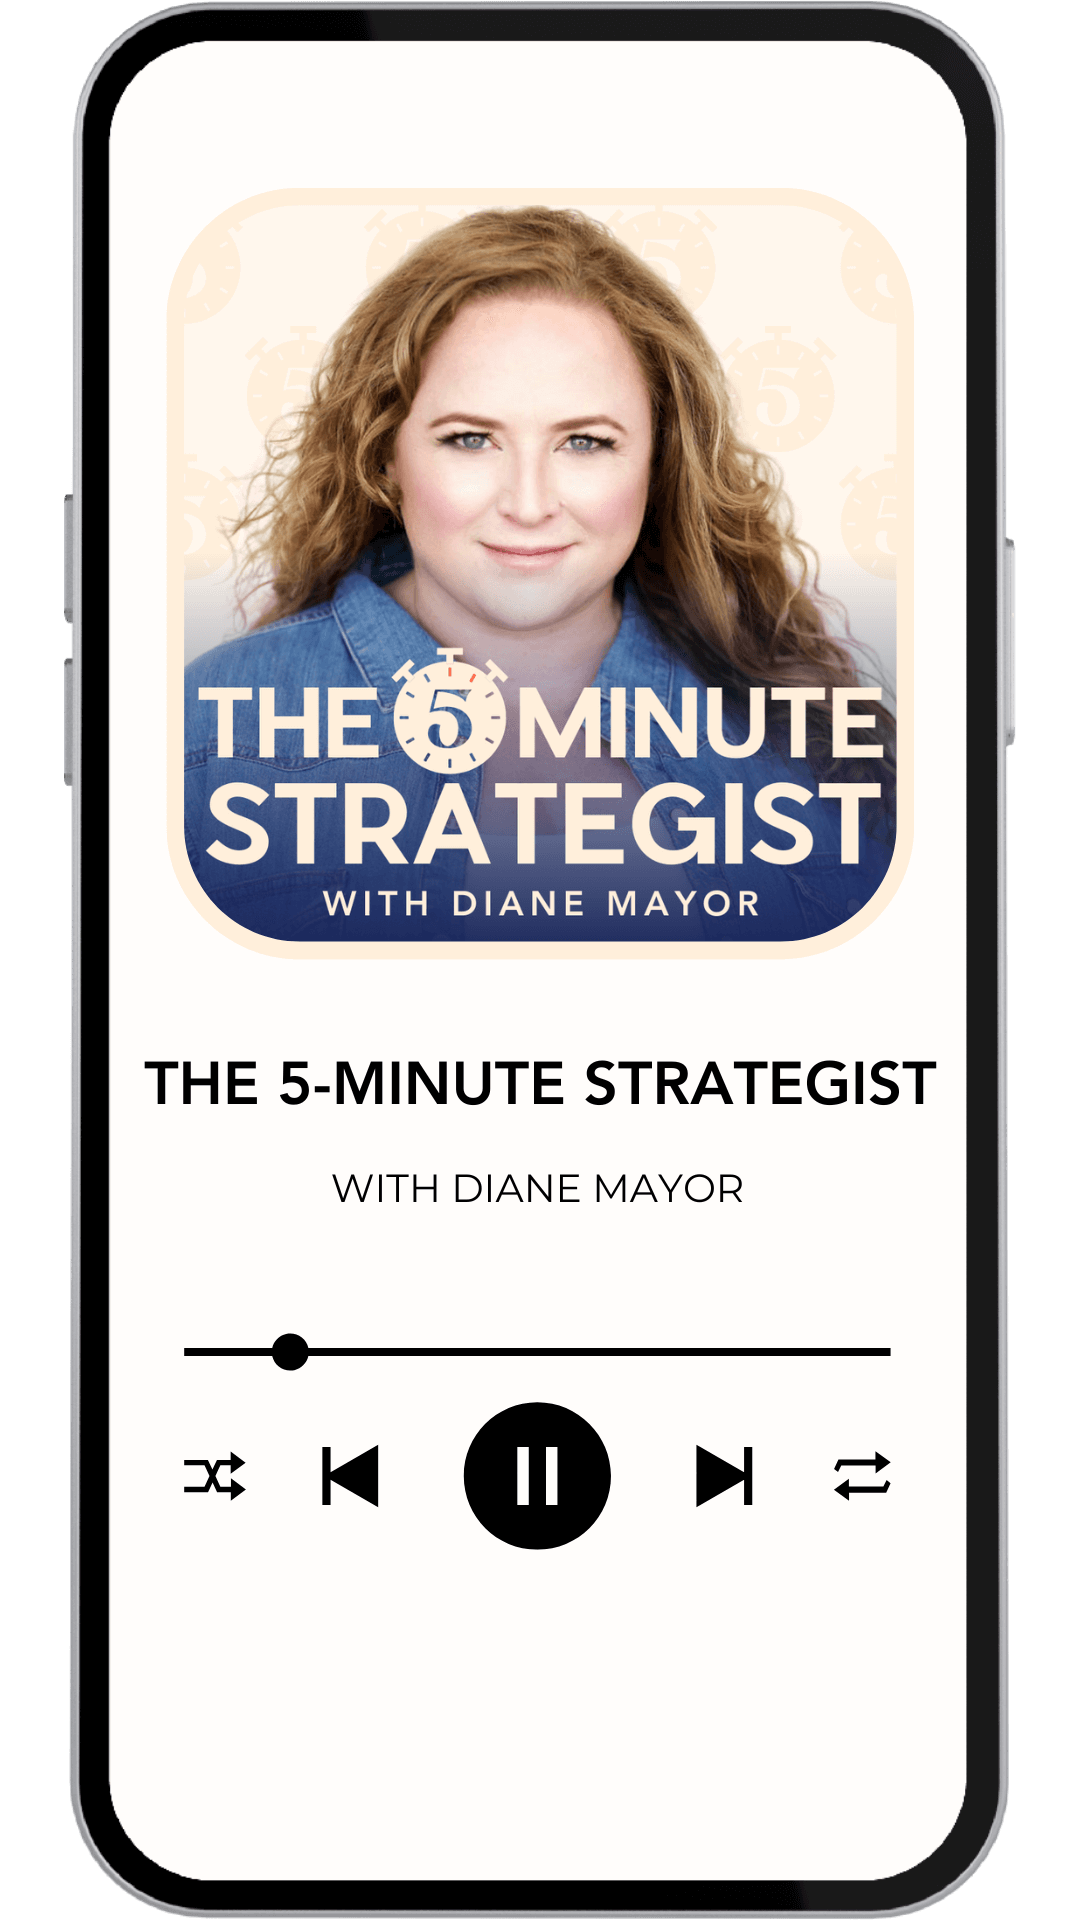 The 5 minute strategist podcast mock up